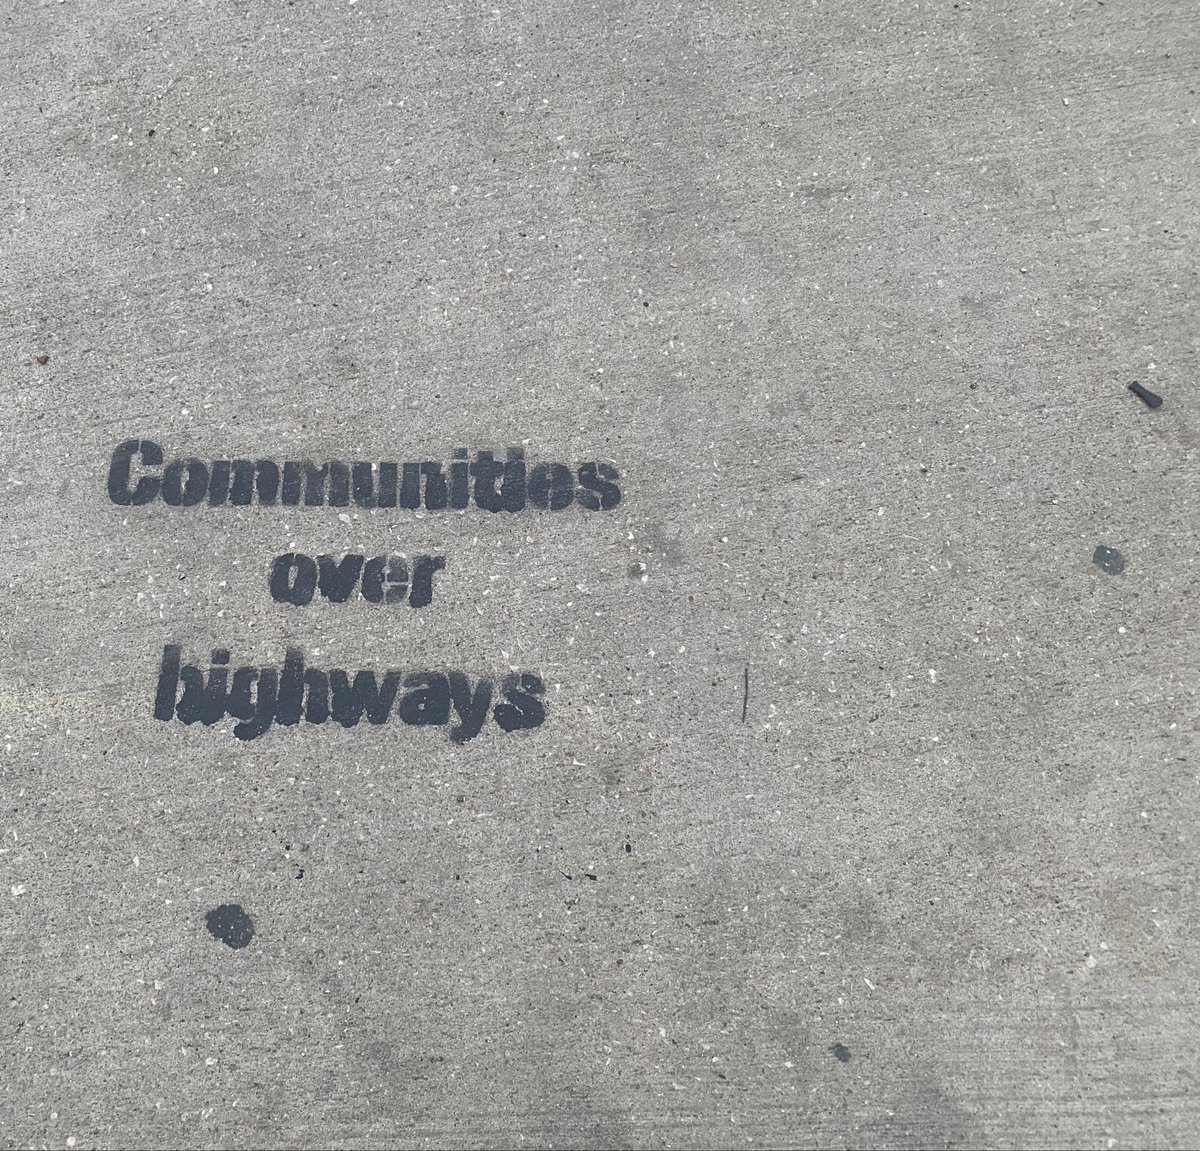 Who did this by Shell Stadium? 👀👀👀 “Communities over highways”